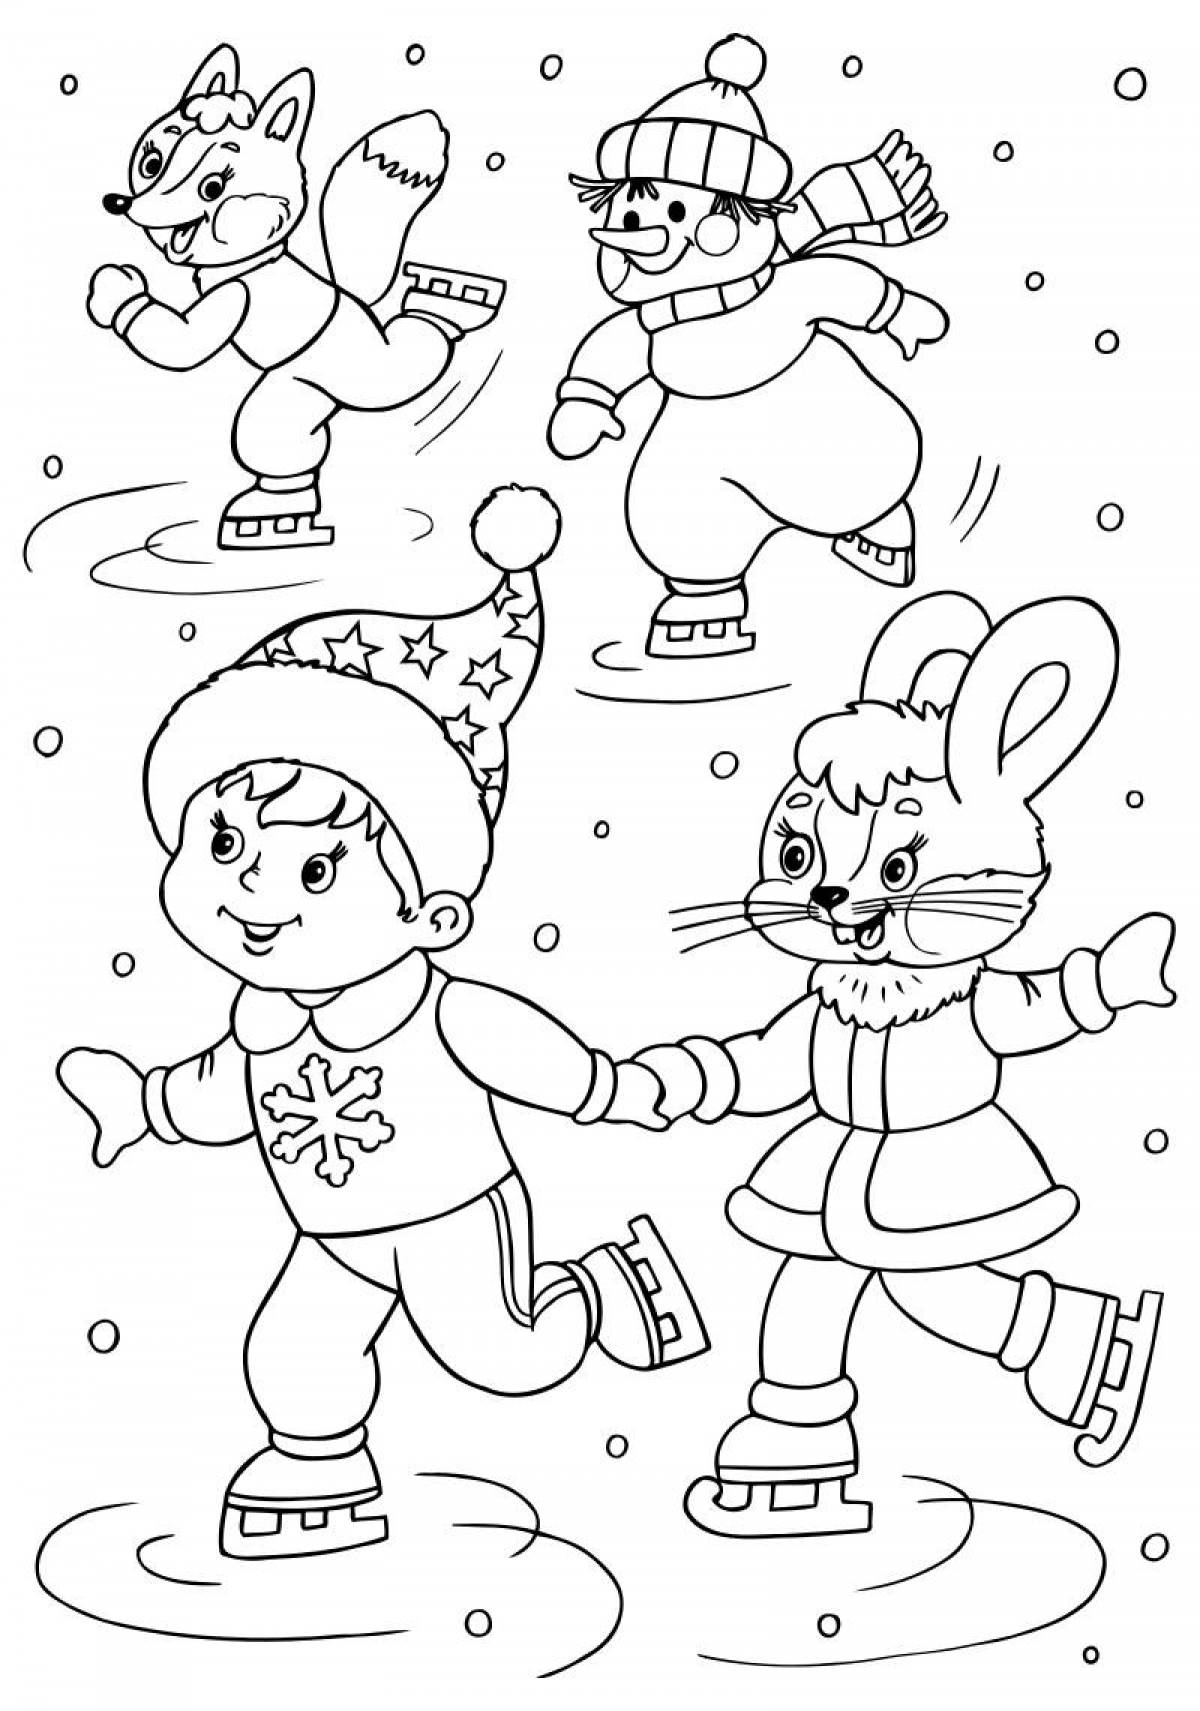 Fantastic winter coloring book for children 5-6 years old